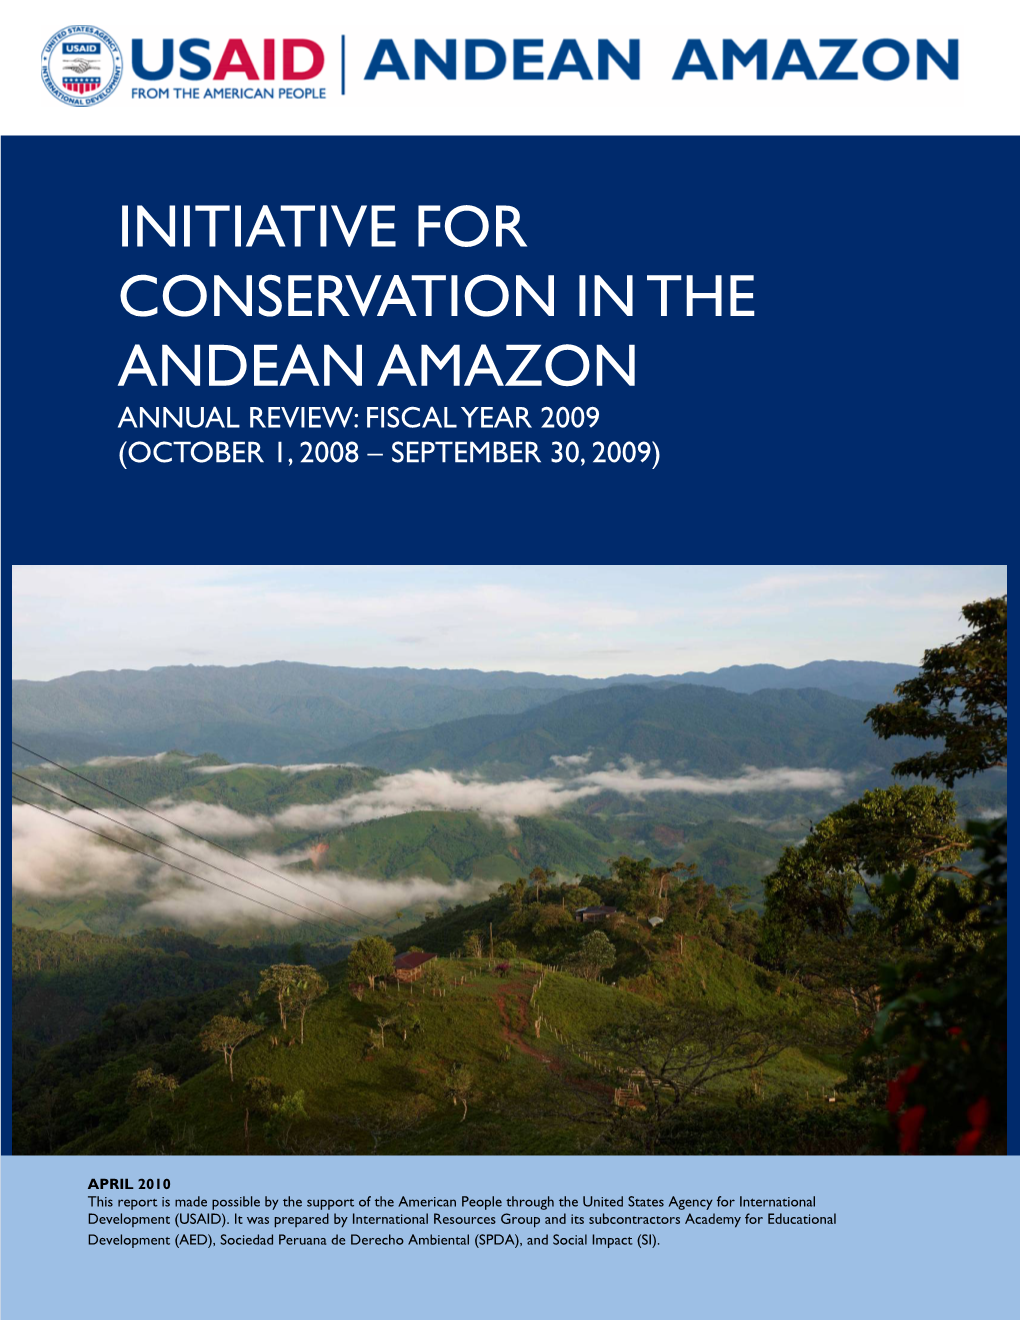 Initiative for Conservation in the Andean Amazon Annual Review: Fiscal Year 2009 (October 1, 2008 – September 30, 2009)